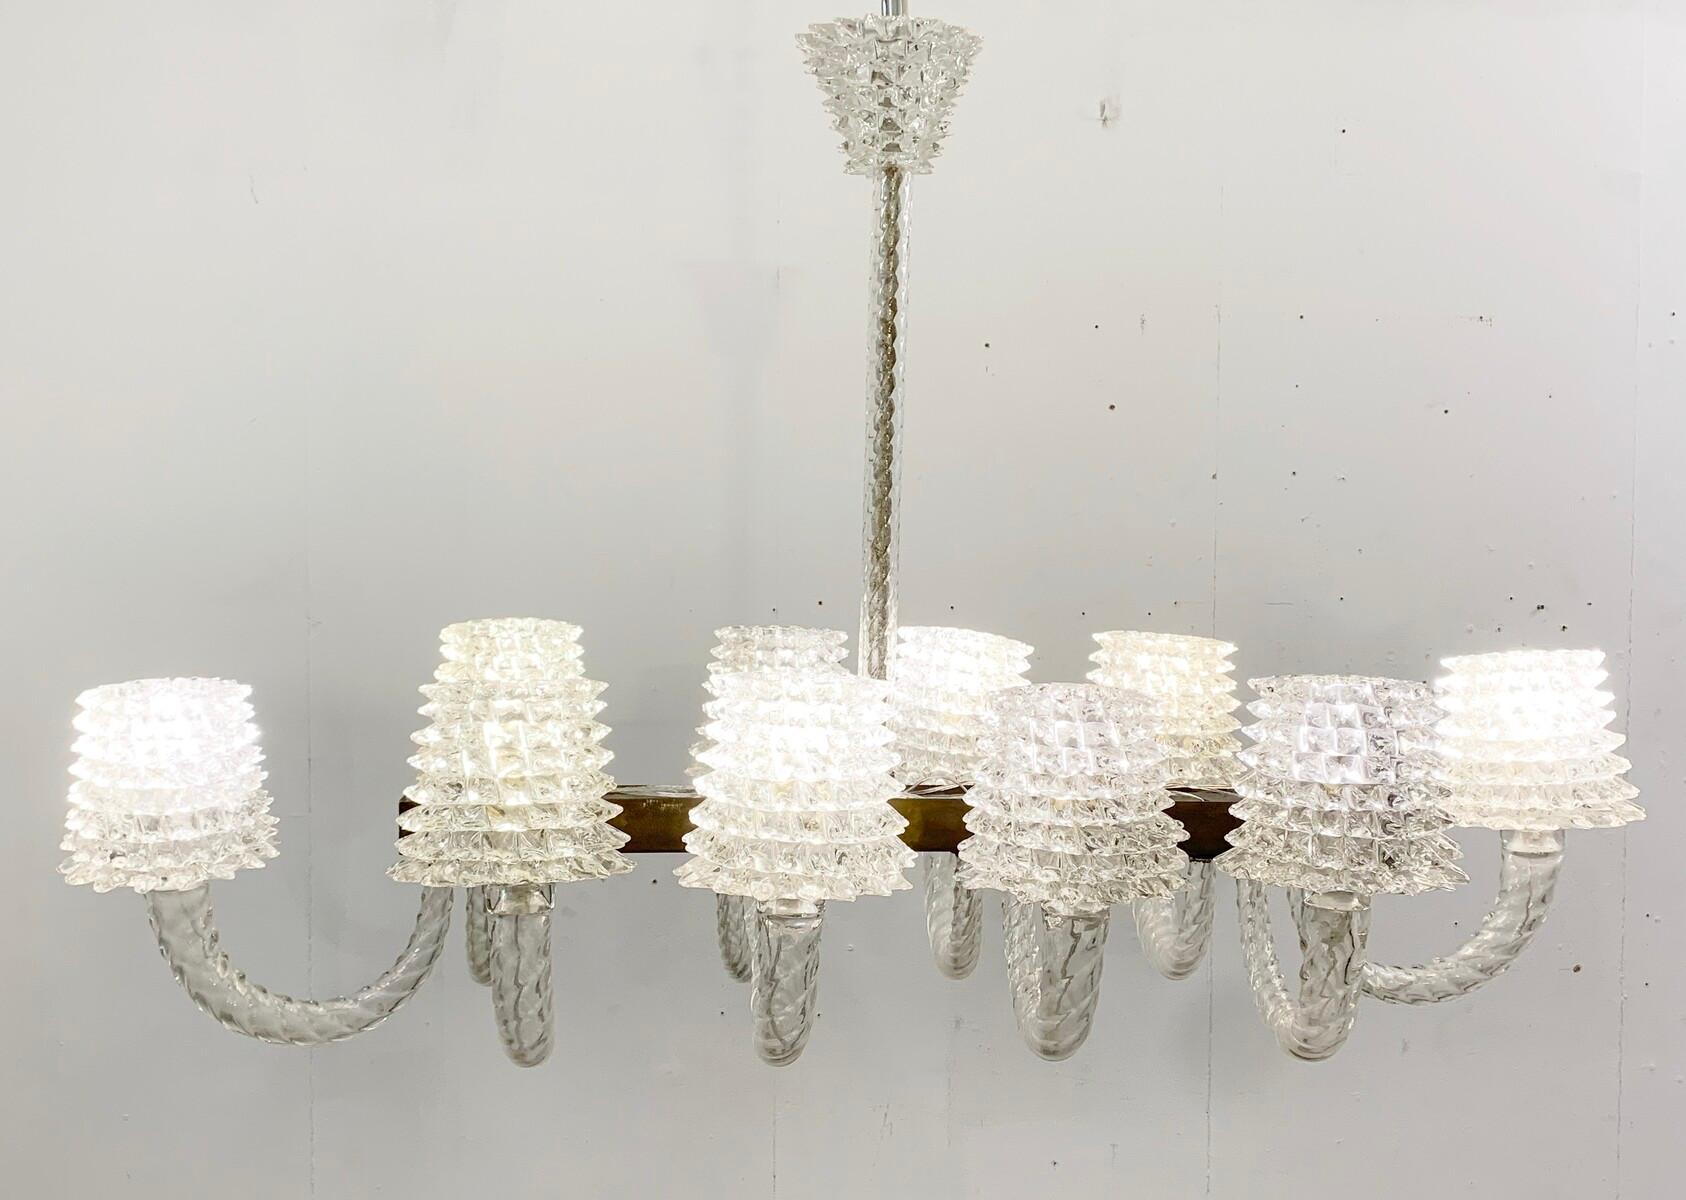 Rostrato glass chandelier by Ercole Barovier - Italy 1940s.